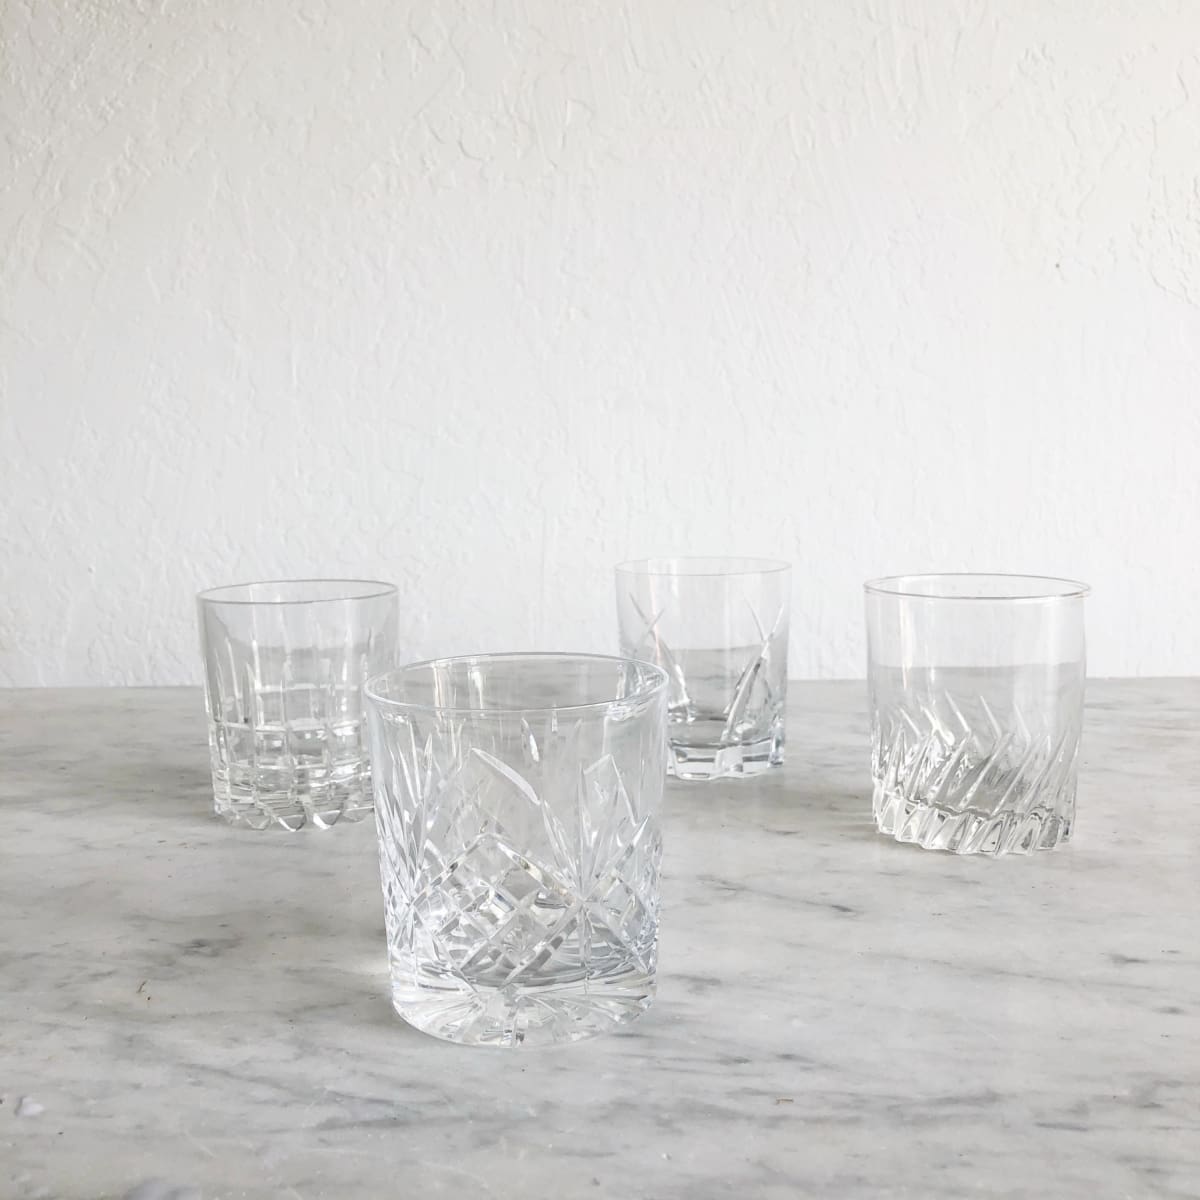 https://elsiegreen.com/cdn/shop/products/glamorous-vintage-bar-glass-set-of-4-the-french-kitchen-aperitif-appertif-glasses-champagne-coupe-coupes-water-old-fashioned-877.jpg?v=1591909613